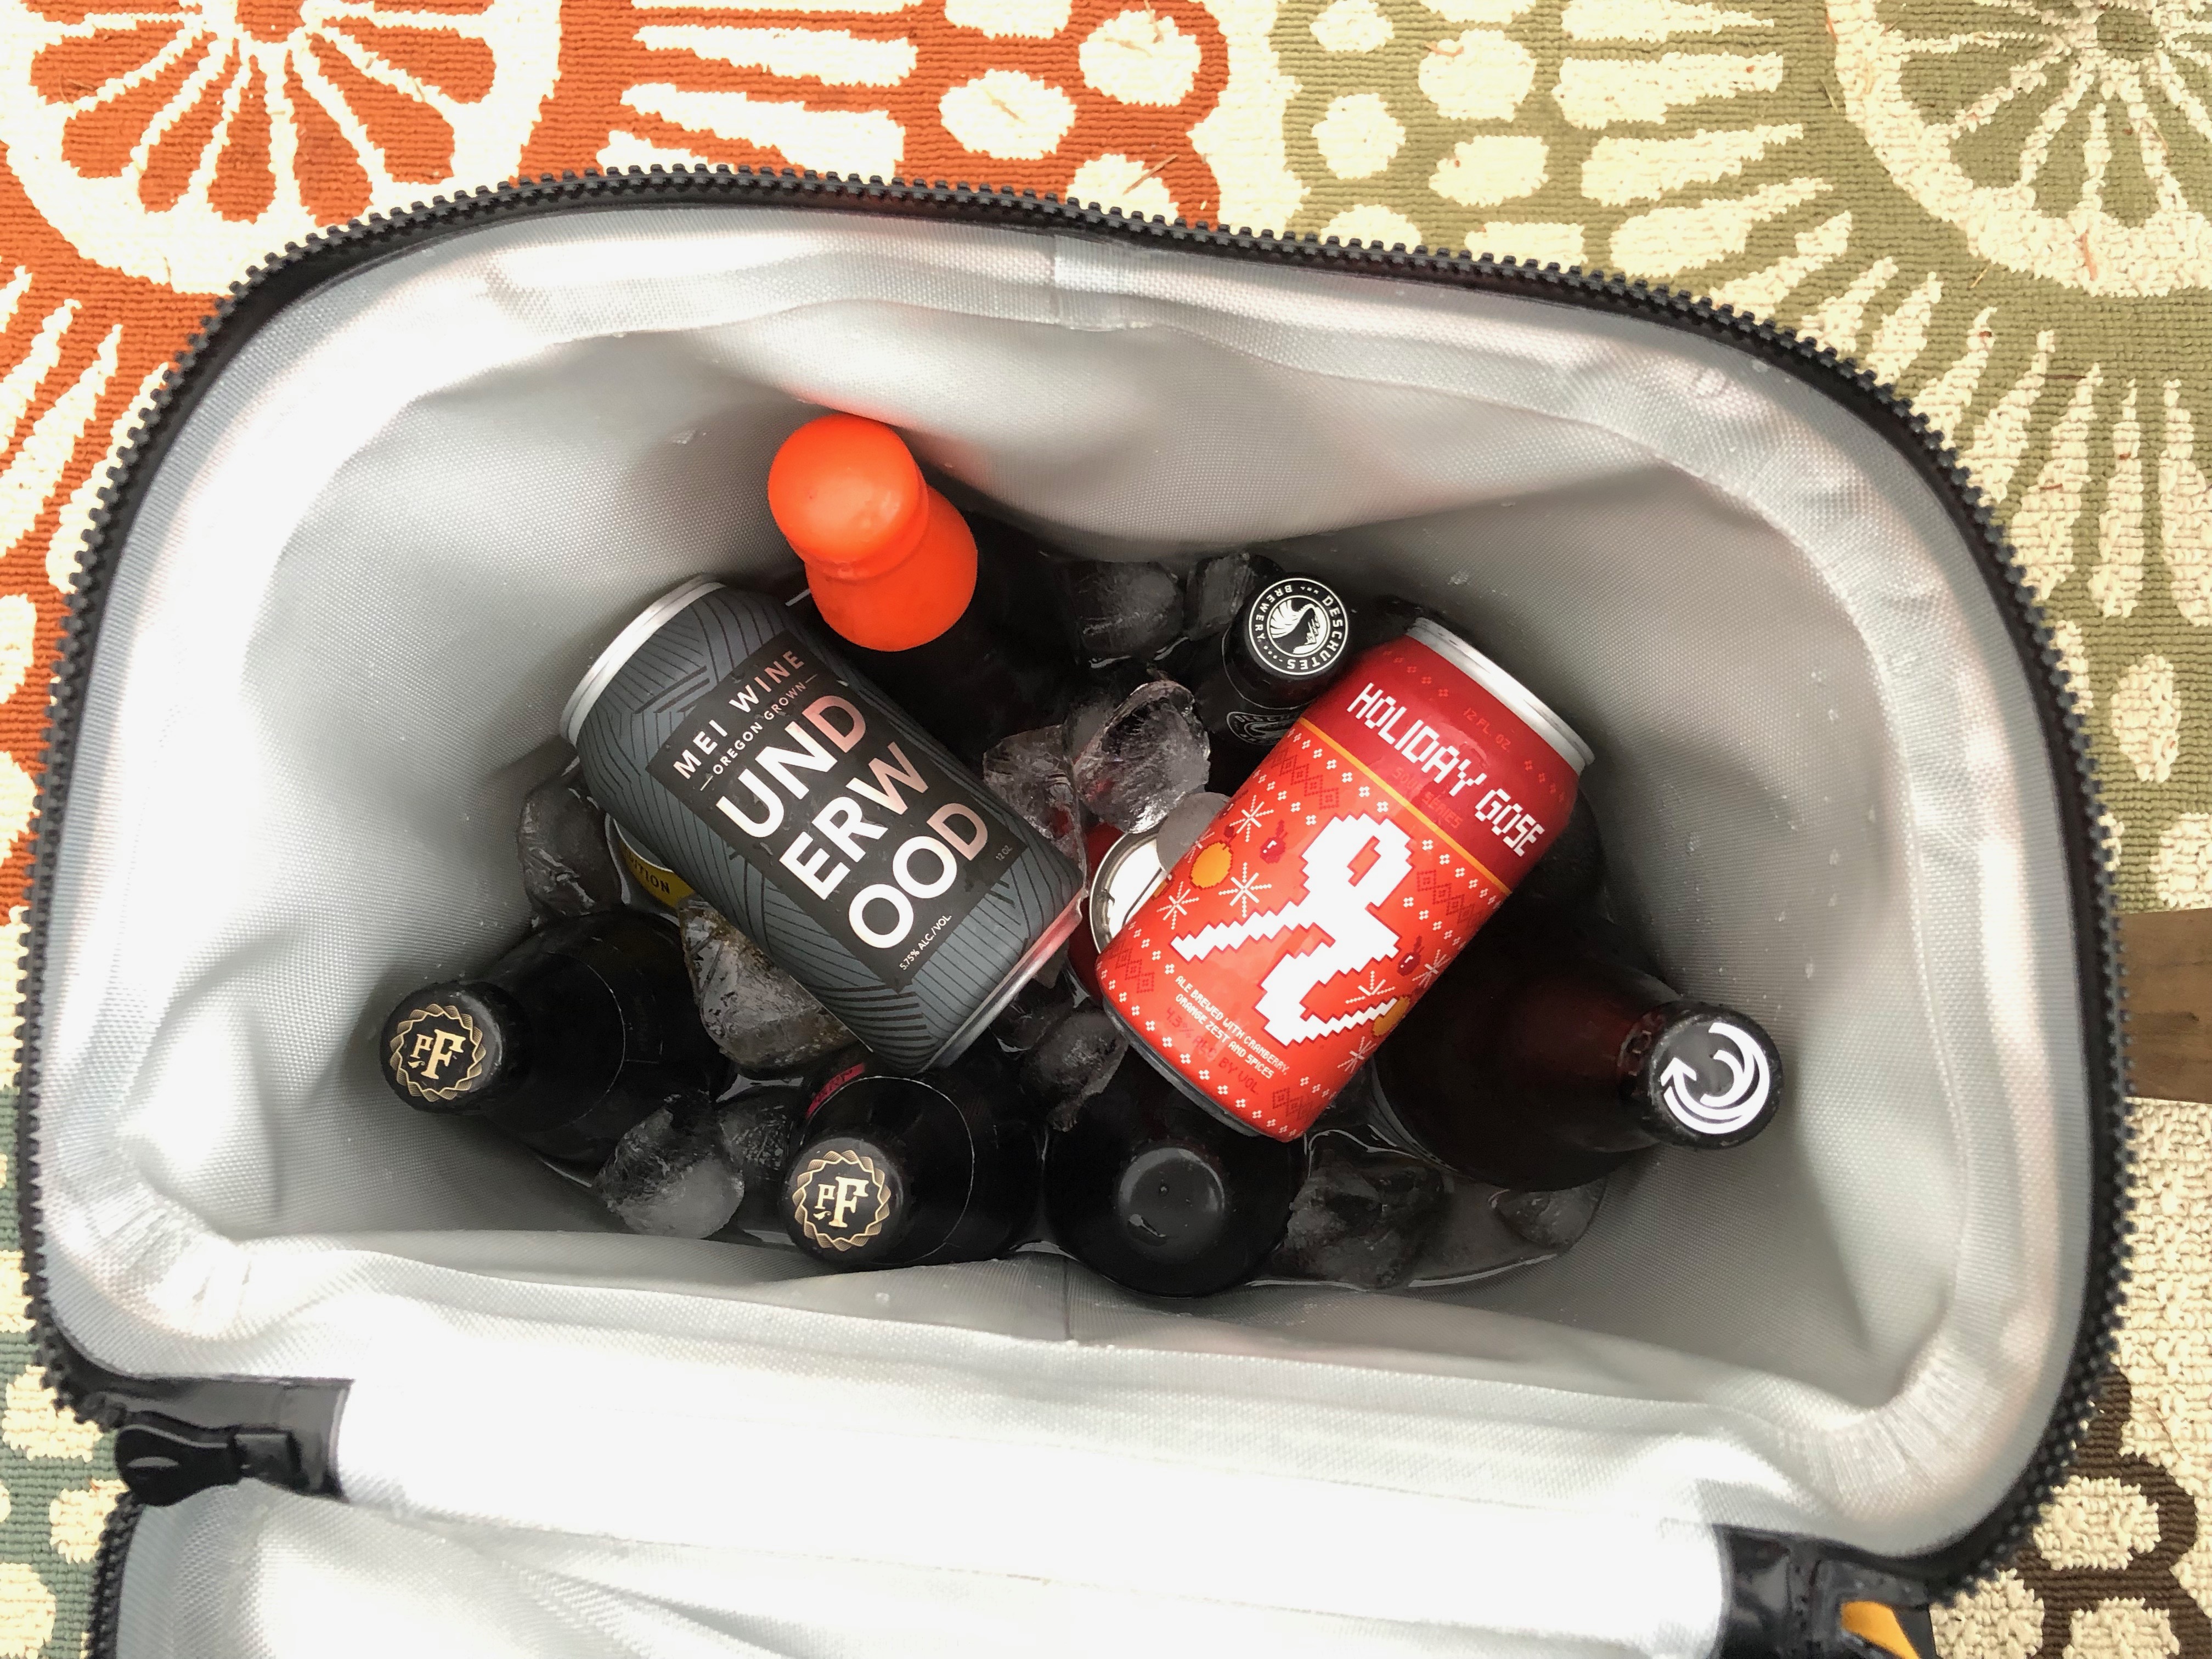 Cans and bottles fit nicely inside the Hydro Flask Unbound Pack.